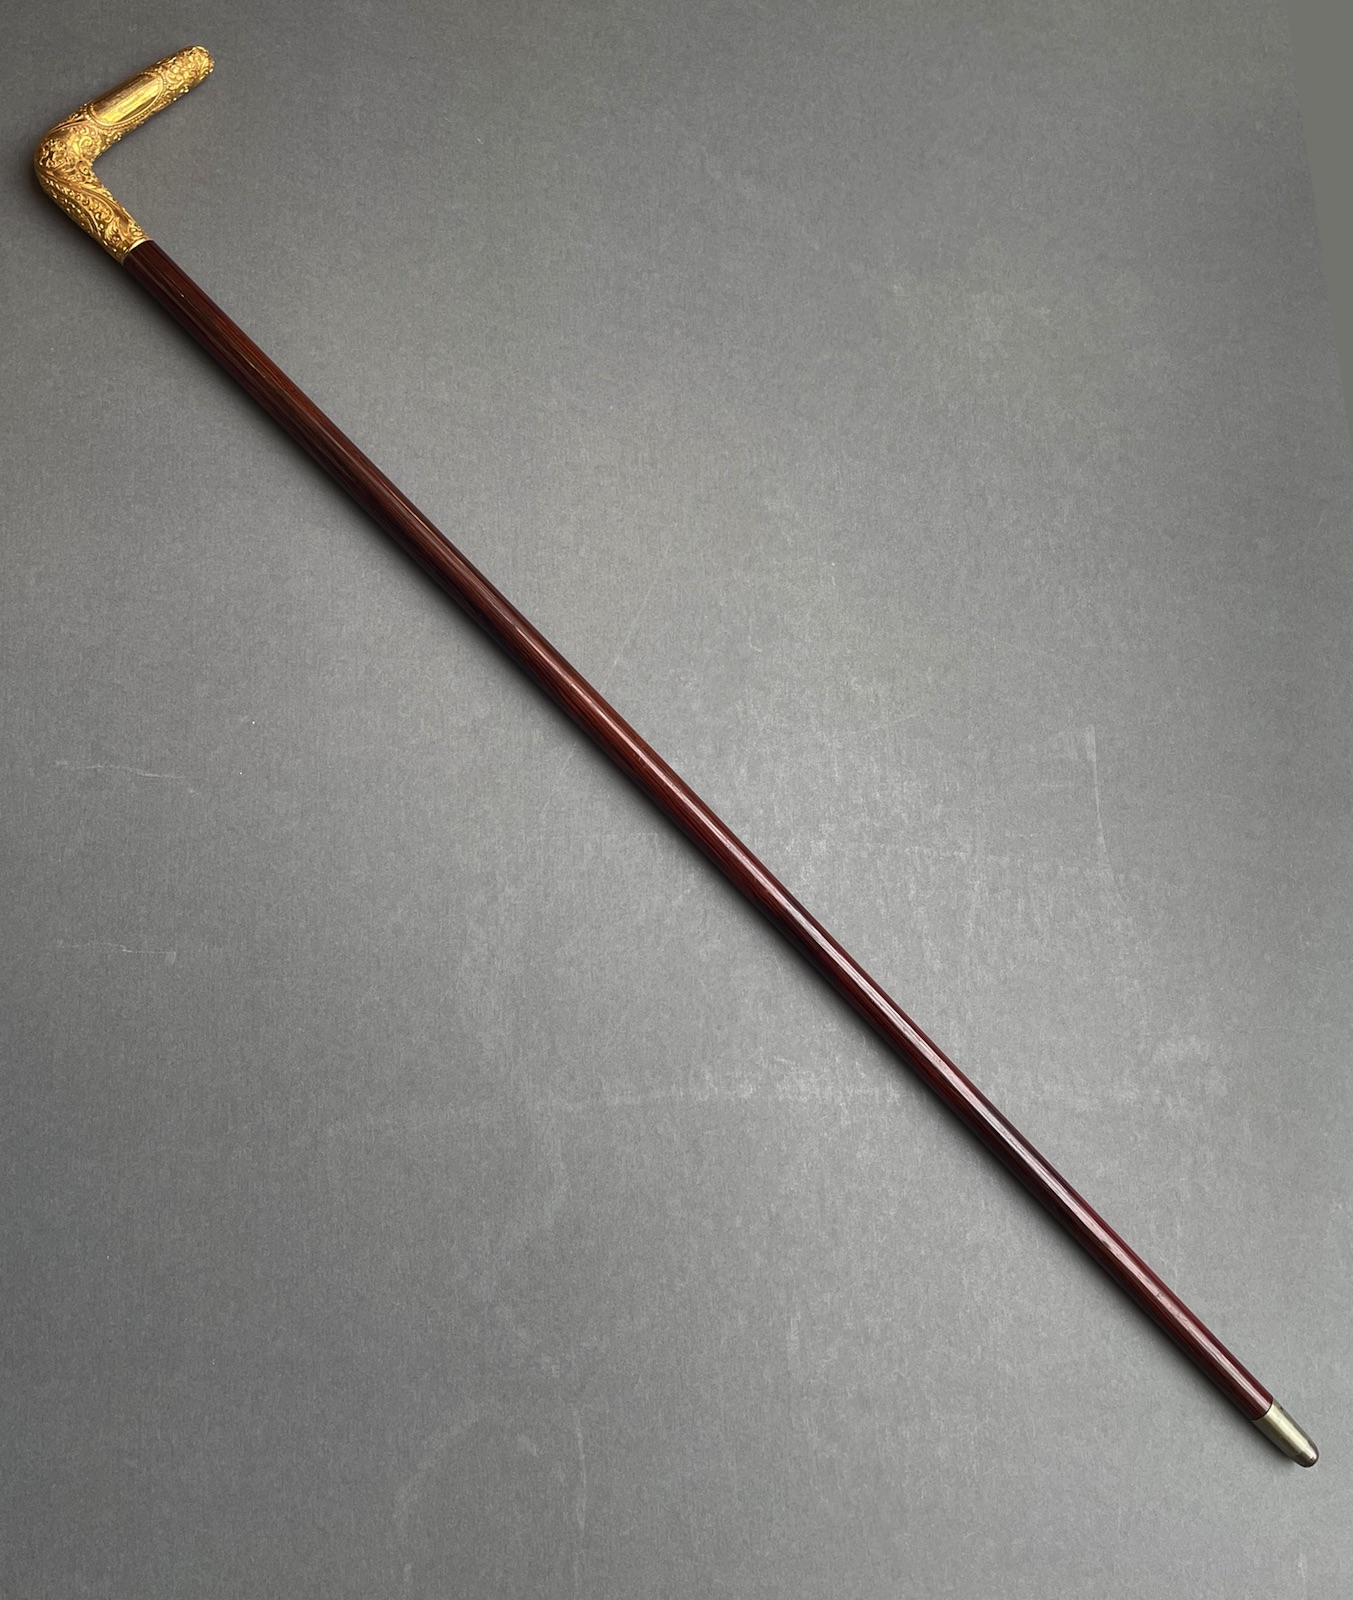 10K Gold Walking Stick / Cane with Decorative Repoussé Handle & Exotic Wood  Shaft - dated 1909 